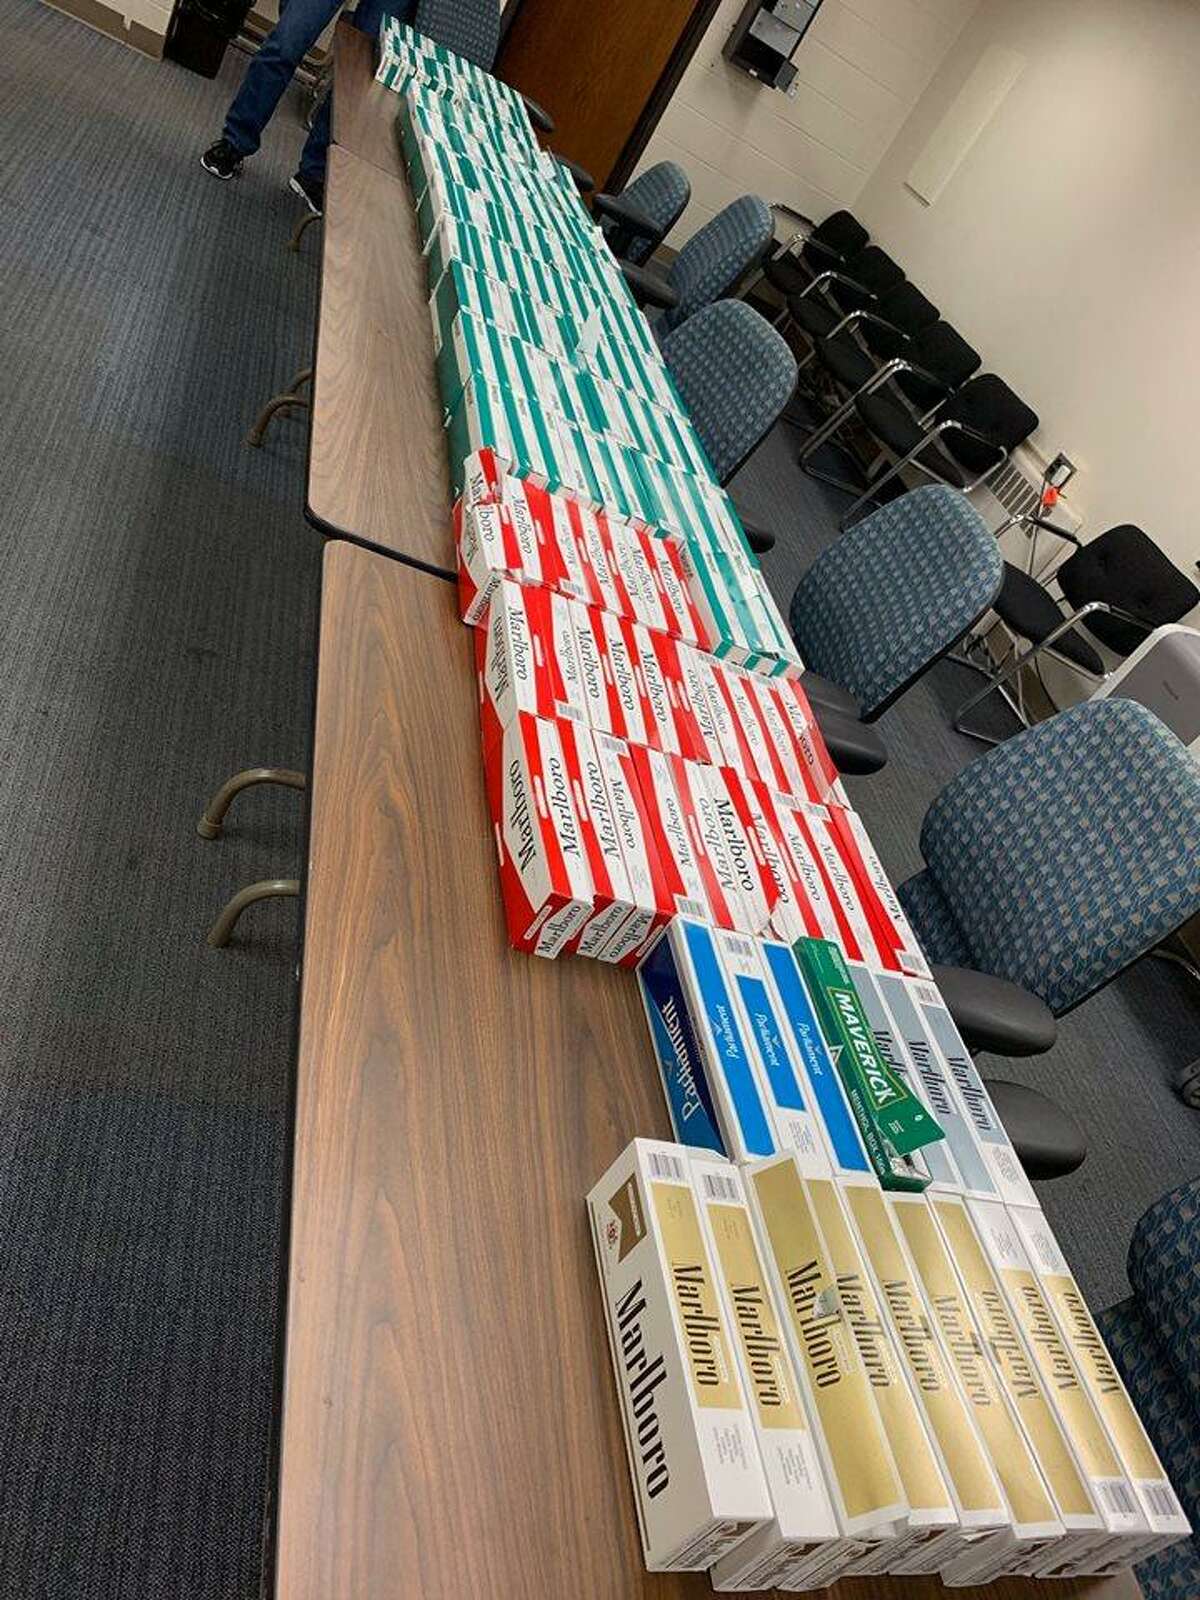 Police seized gambling records, nearly 150 cartons of untaxed cigarettes and more than $780 during a traffic stop on Friday.